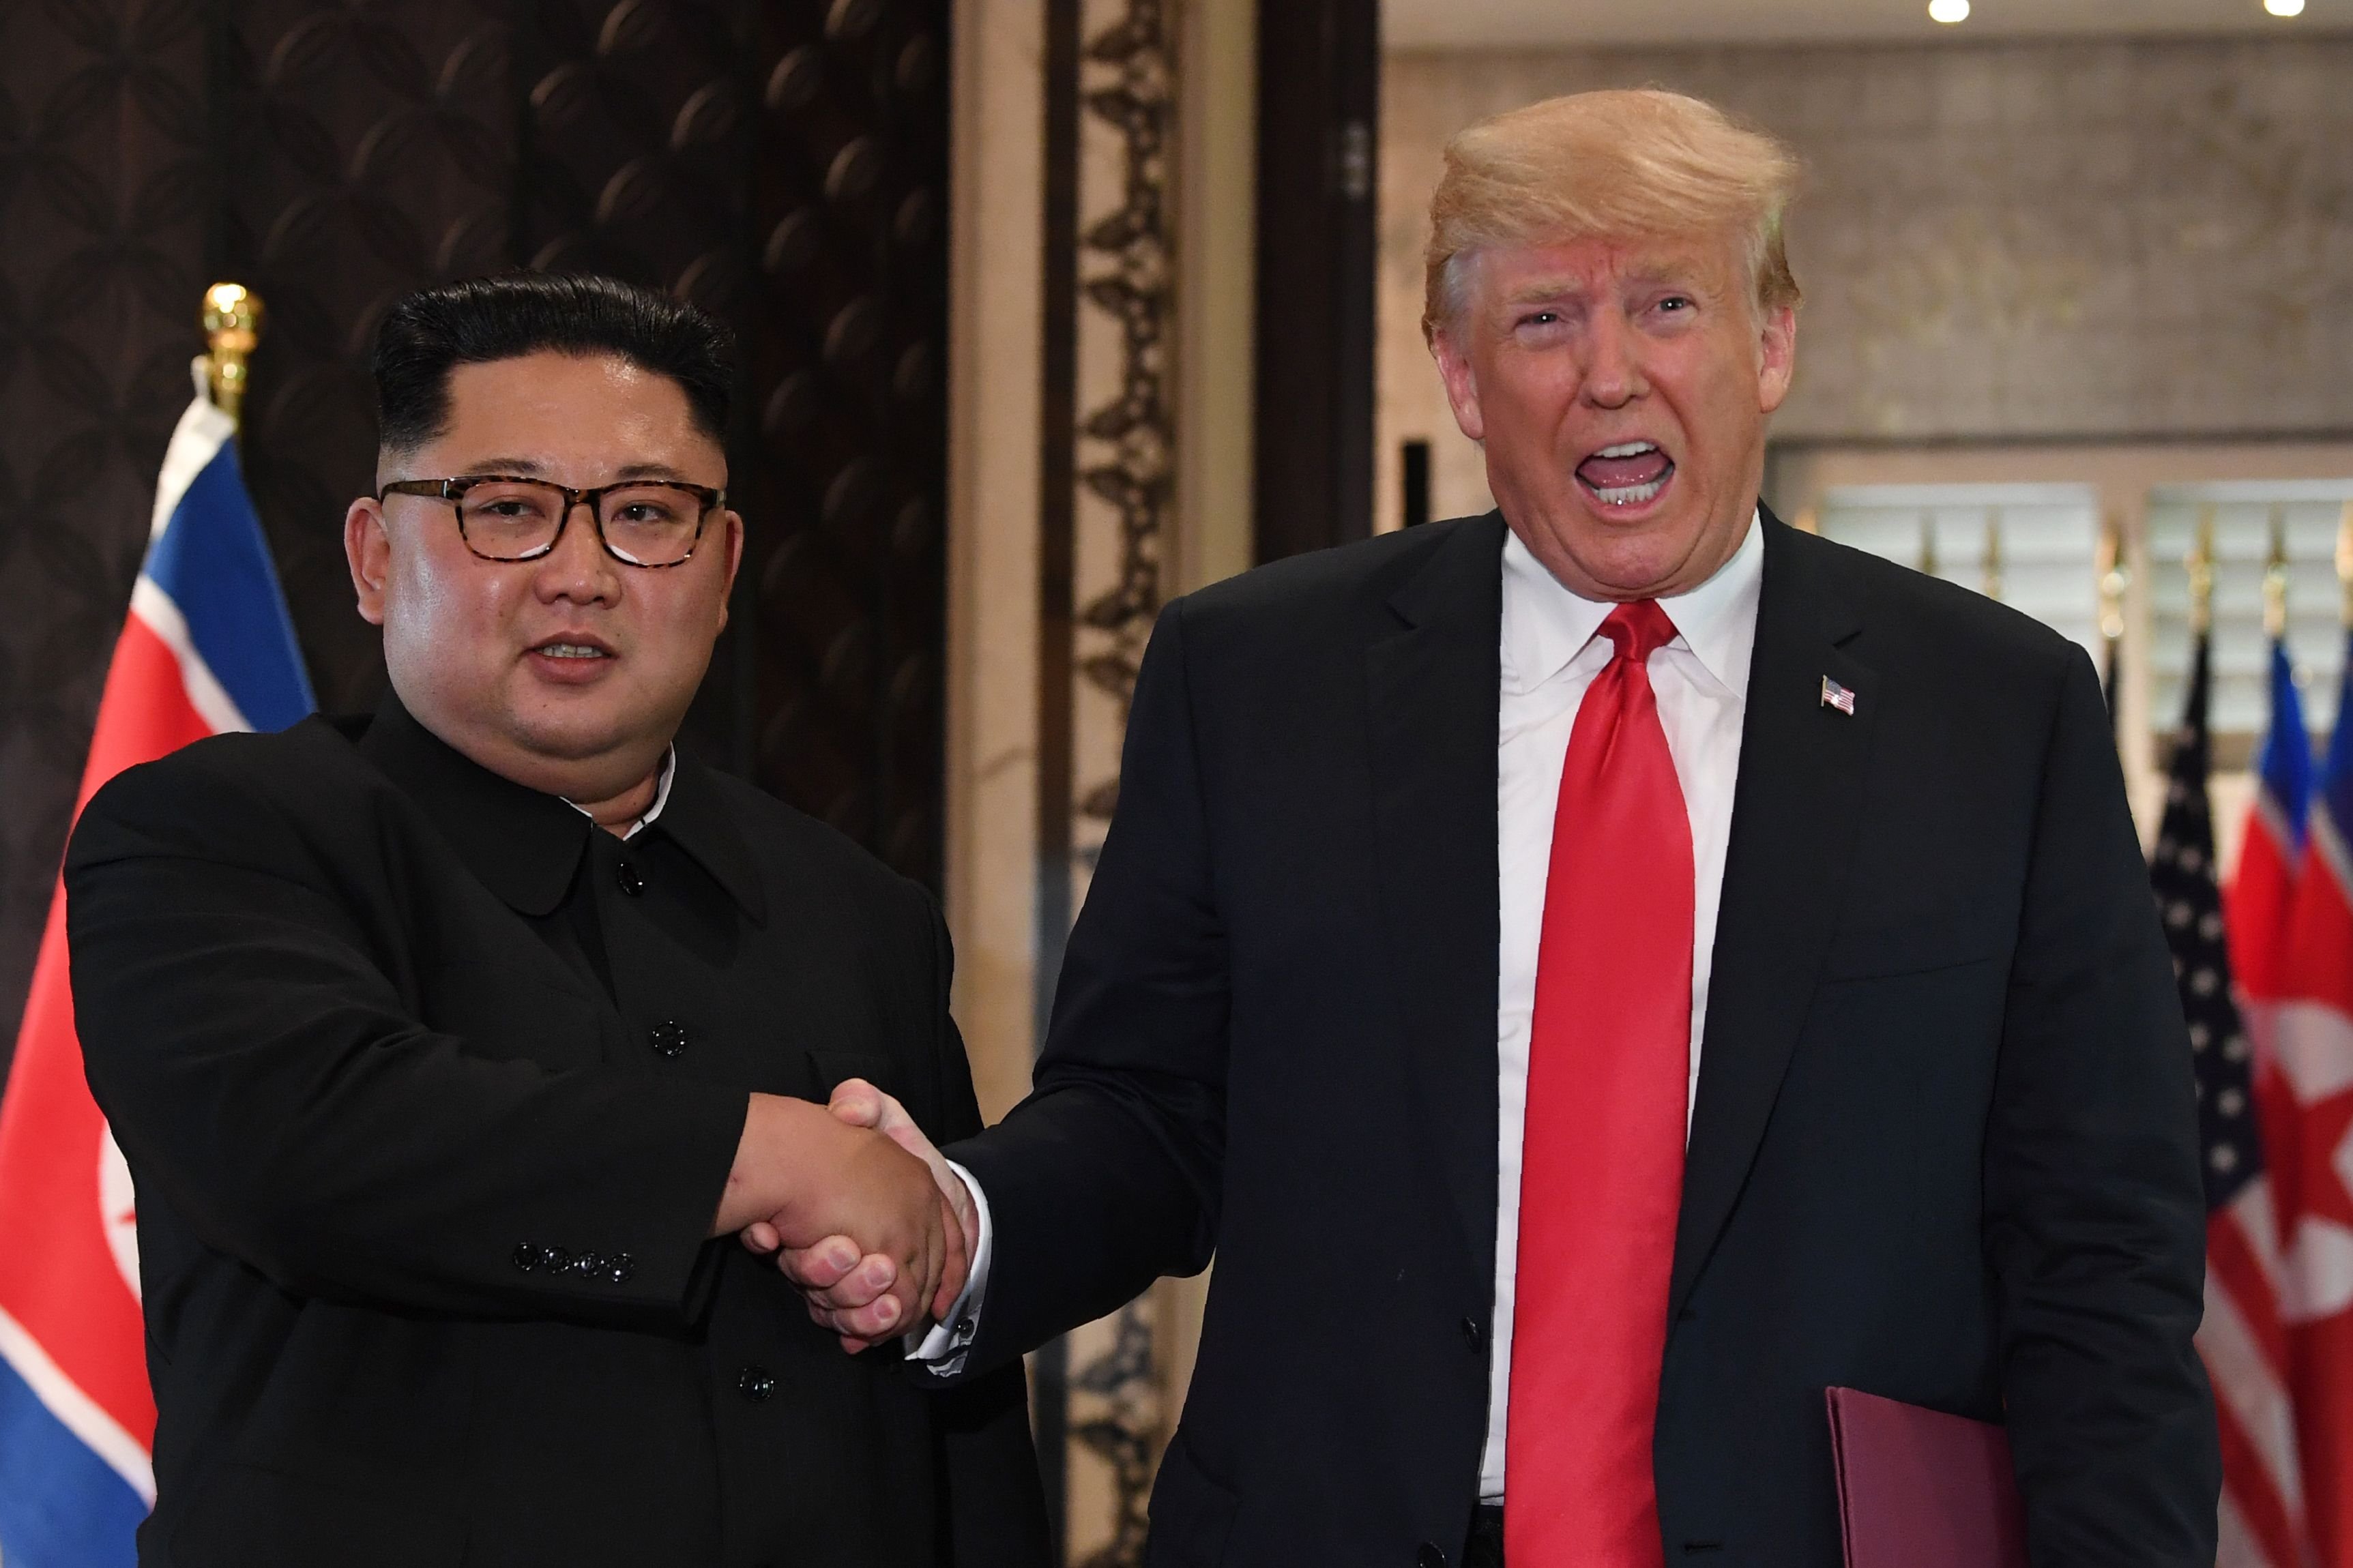 TOPSHOT - US President Donald Trump (R) and North Korea's leader Kim Jong Un shake hands following a signing ceremony during their historic US-North Korea summit, at the Capella Hotel on Sentosa island in Singapore on June 12, 2018. - Donald Trump and Kim Jong Un became on June 12 the first sitting US and North Korean leaders to meet, shake hands and negotiate to end a decades-old nuclear stand-off. (Photo by SAUL LOEB / AFP) 